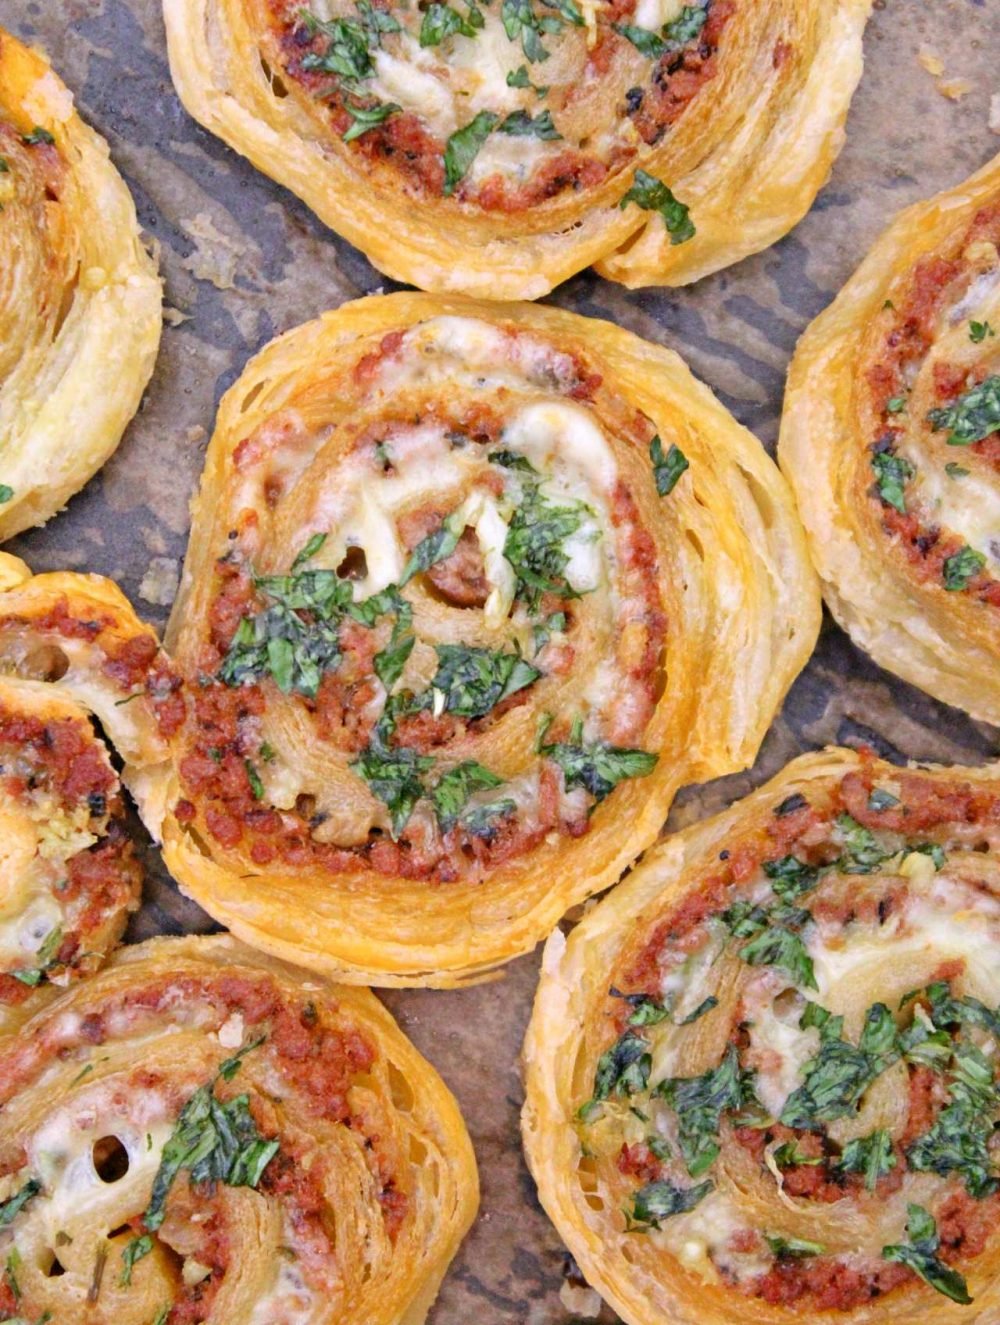 Great as finger food for parties, a yummy snack or a meal on the run, these meat pinwheels are super easy to make and insanely delicious!